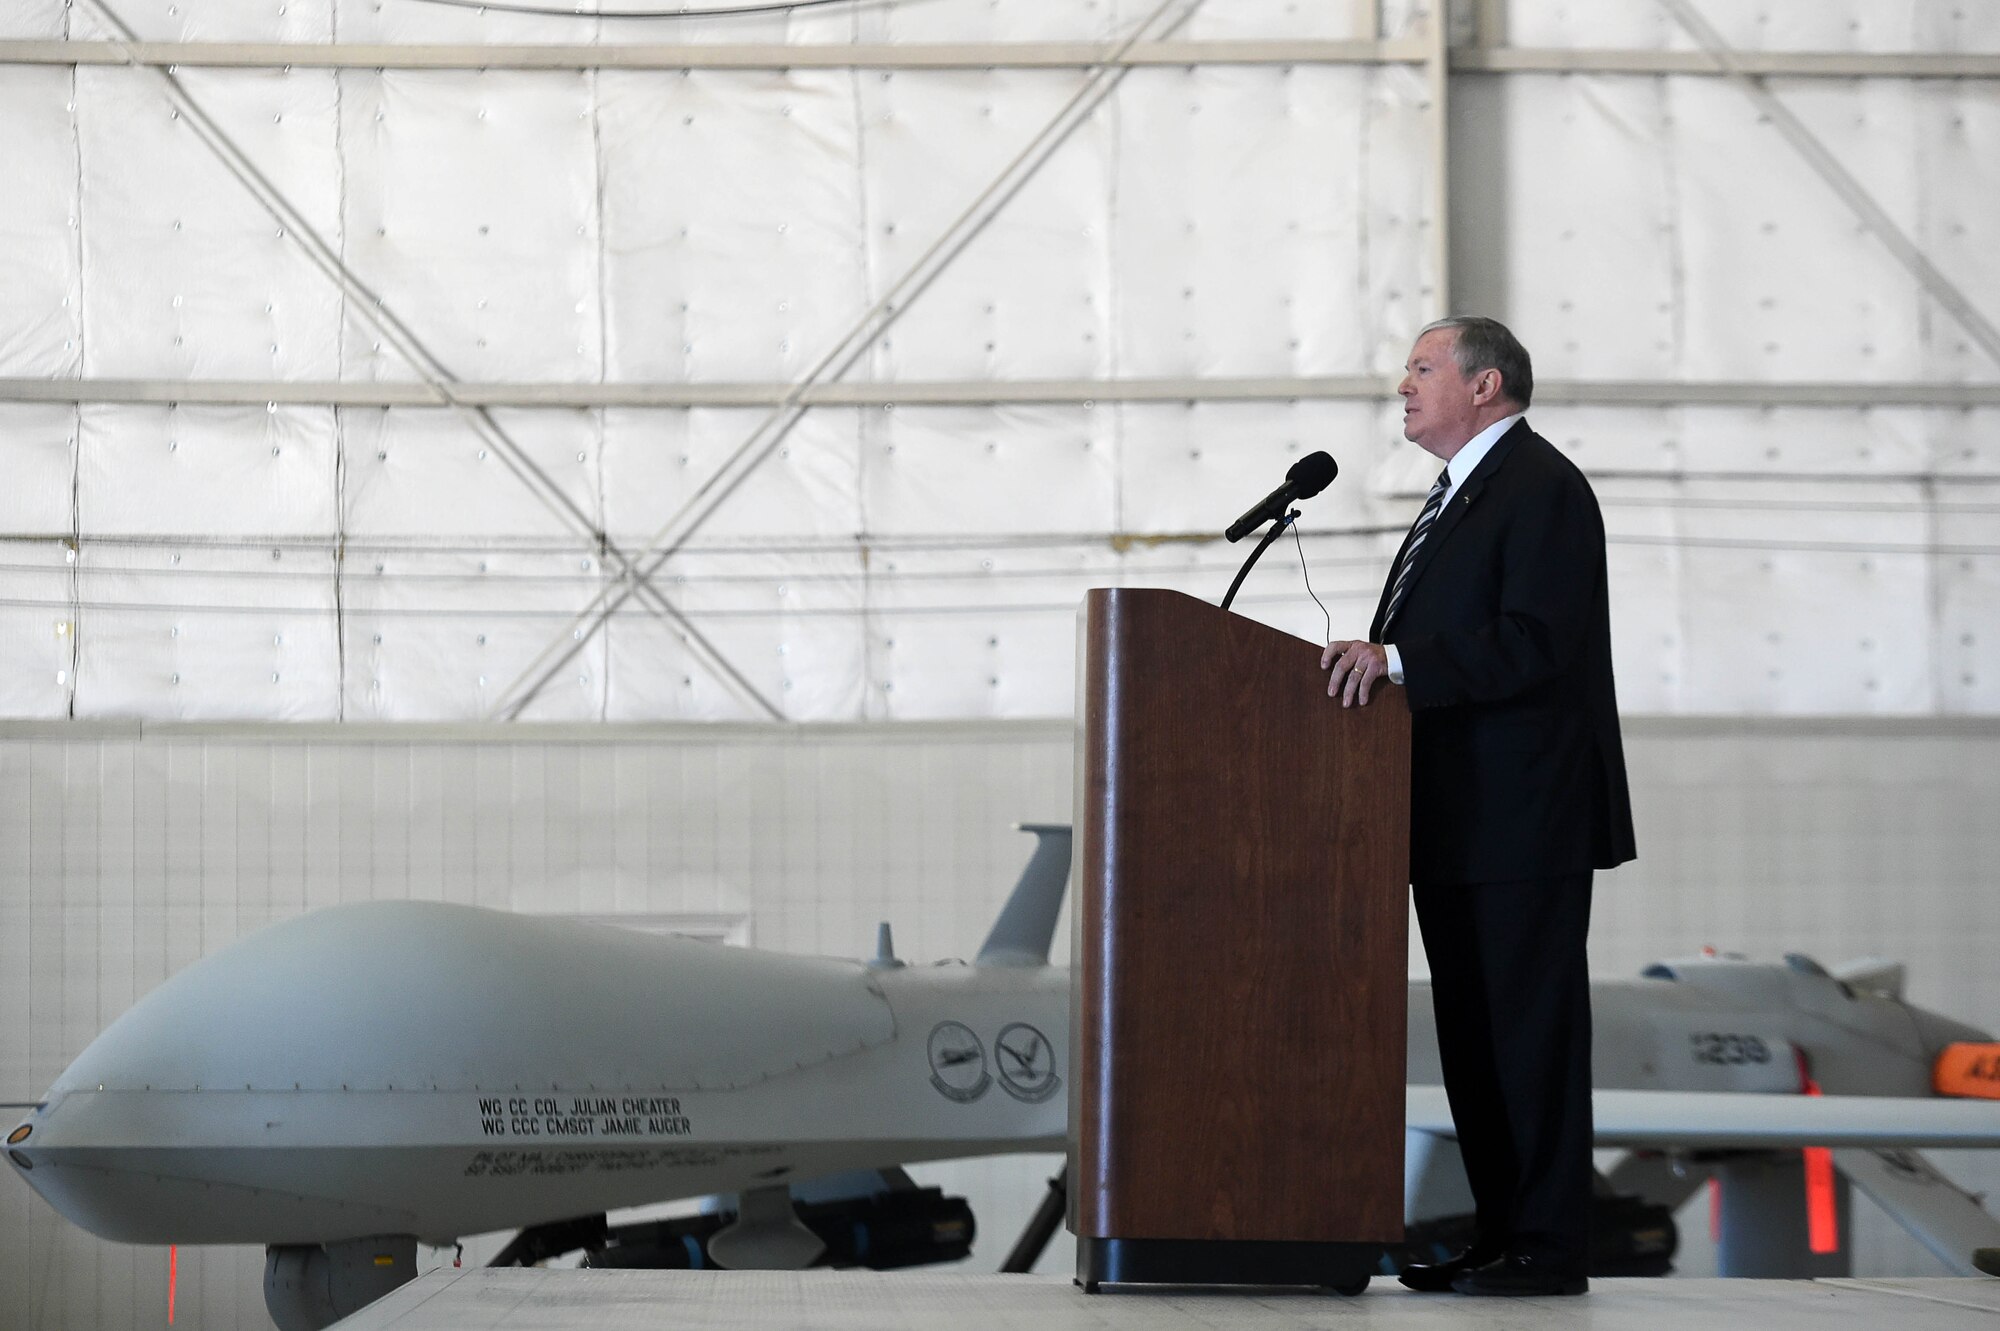 Mr. James G. “Snake” Clark, the director, Intelligence, Surveillance and Reconnaissance, Modernization and Infrastructure and Deputy Chief of Staff for ISR, Headquarters U.S. Air Force, speaks at the MQ-1 Predator retirement ceremony March 9, 2018, at Creech Air Force Base, Nev. Clark played a role in the Air Force acquisition of the MQ-1 Predator and has seen it through many developments, including arming it with munitions, evolving its mission set from ISR to persistent attack. (U.S. Air Force photo by Senior Airman James Thompson)